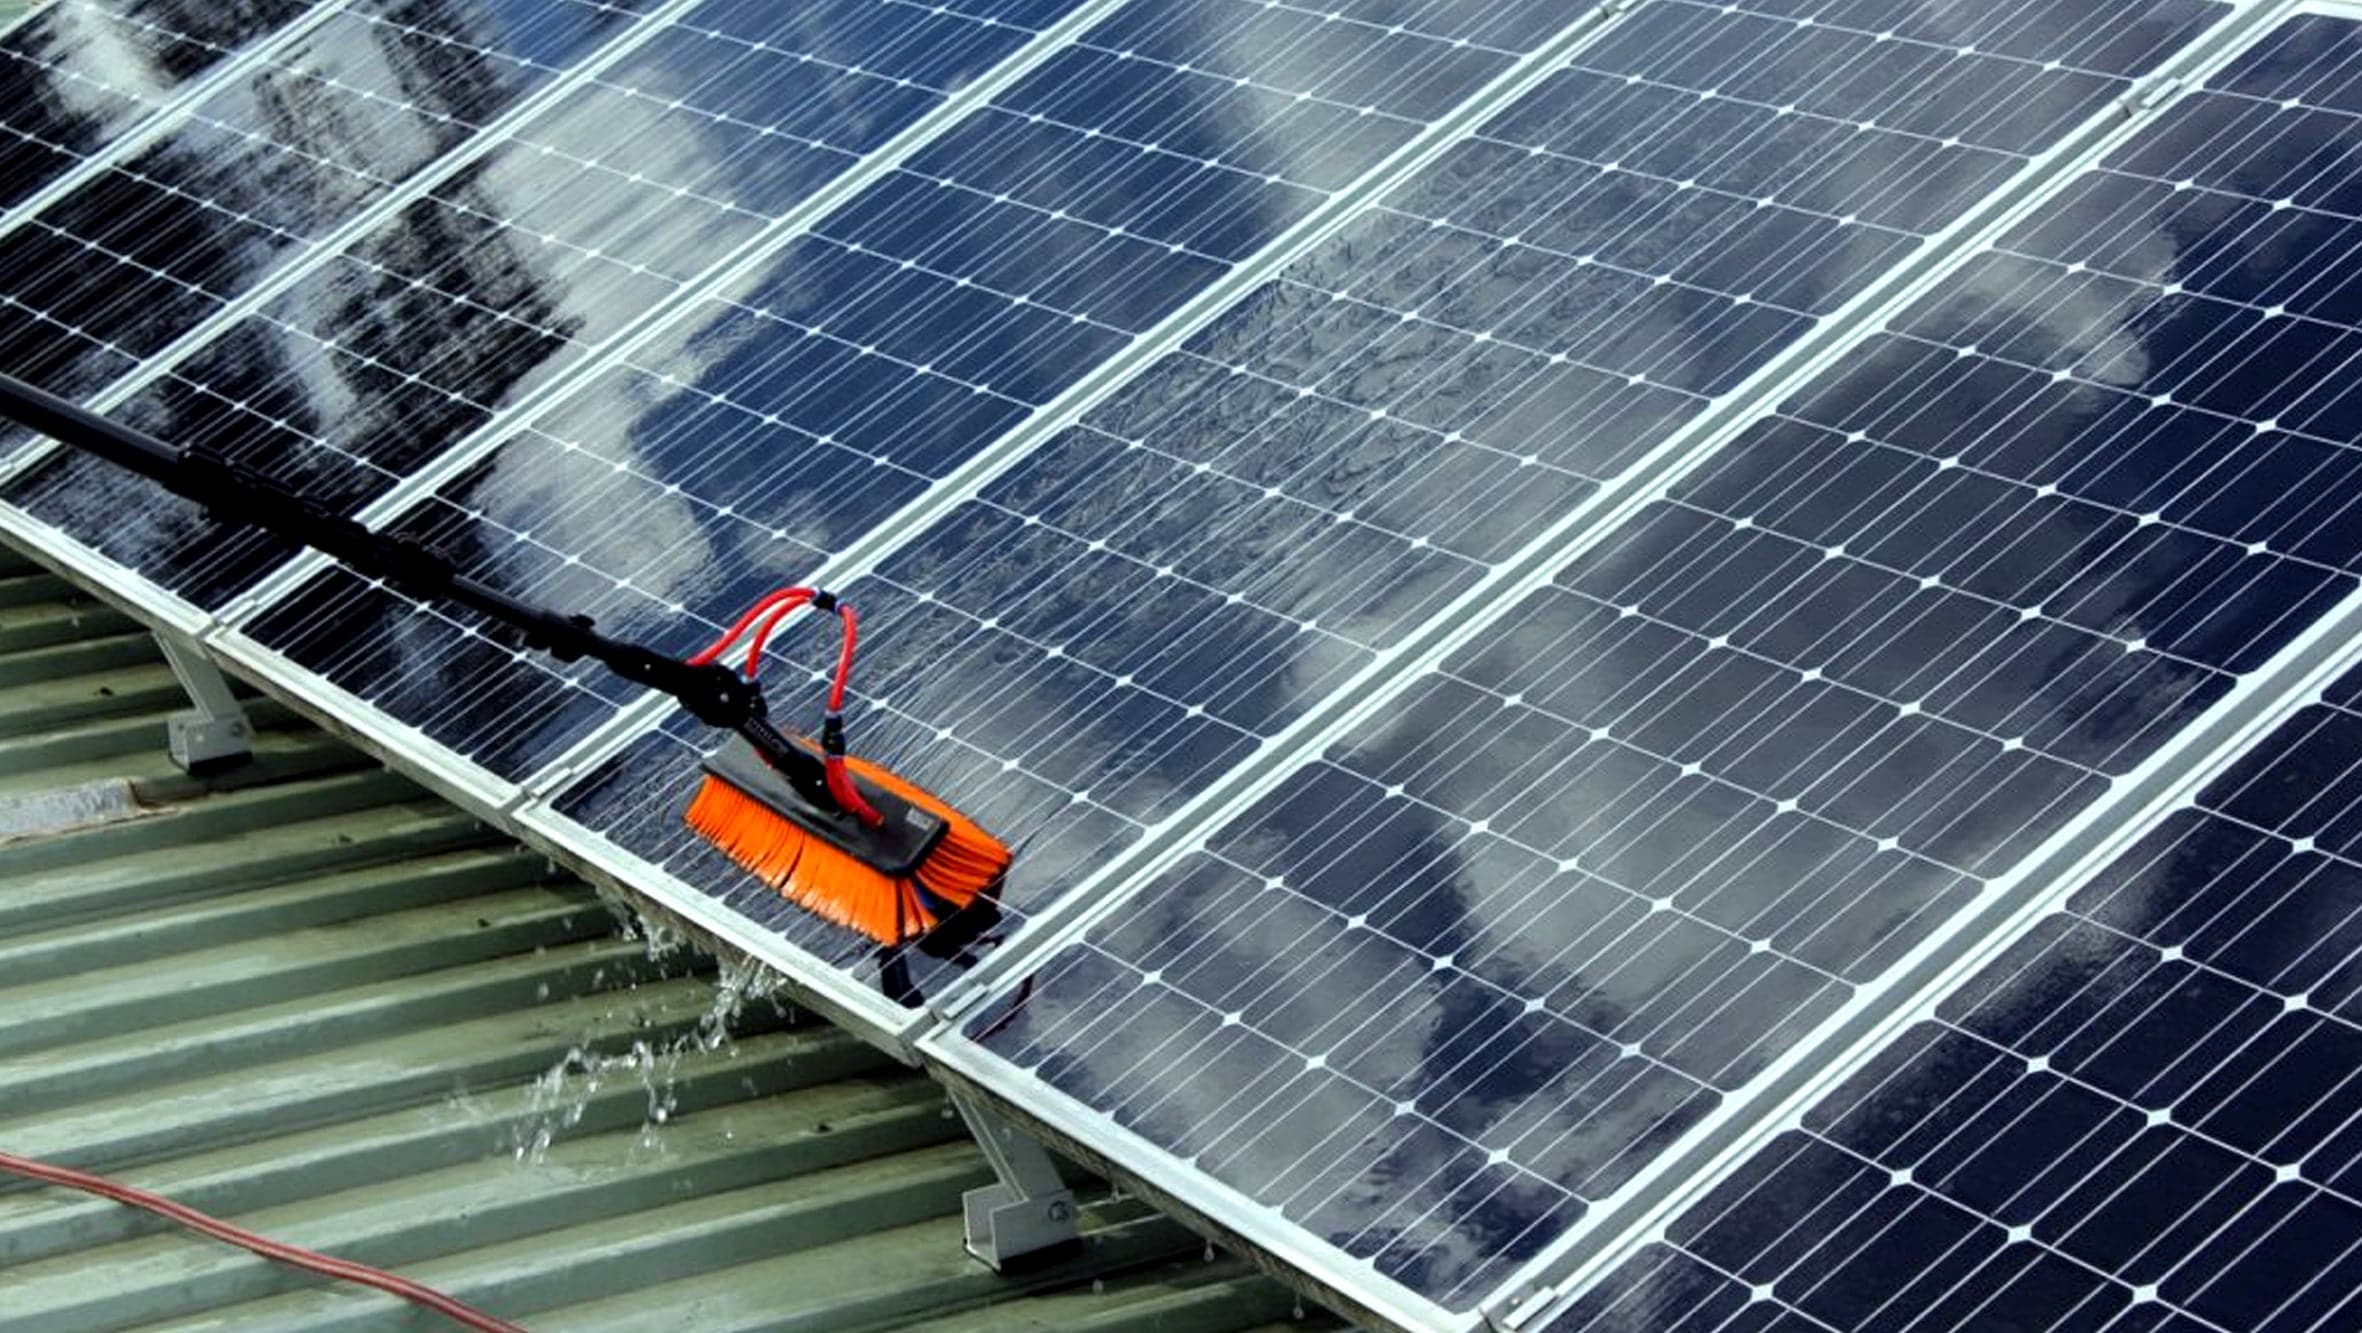 Solar-Panl-And-Cleaning-Brush